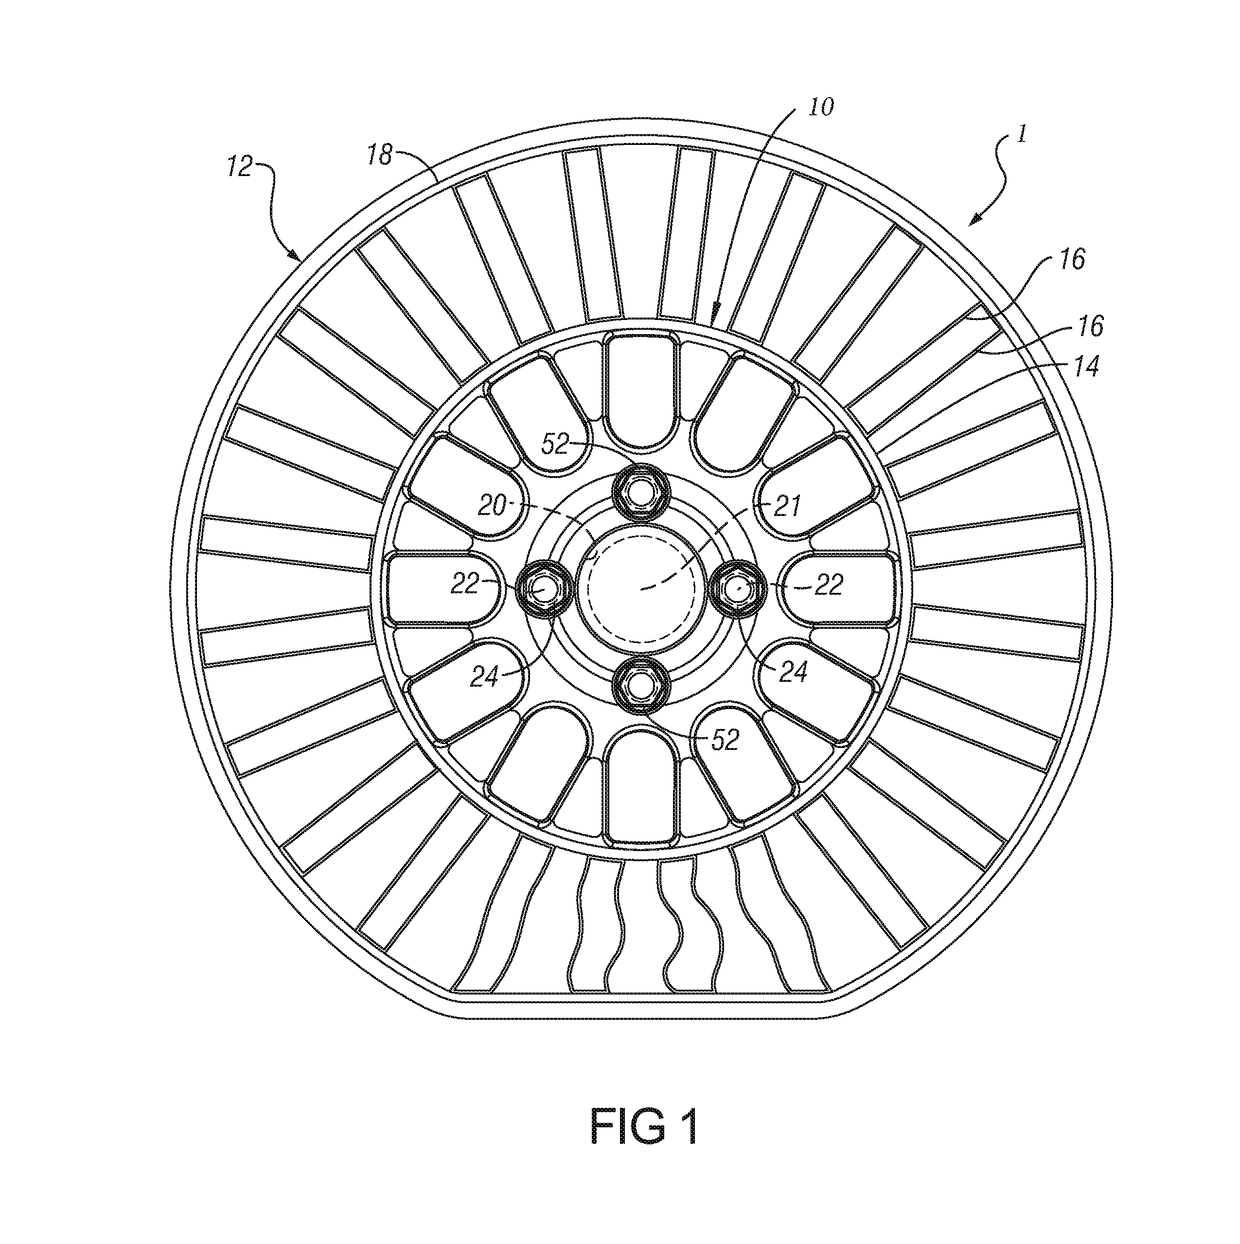 Thermoplastic wheel hub and non-pneumatic tire